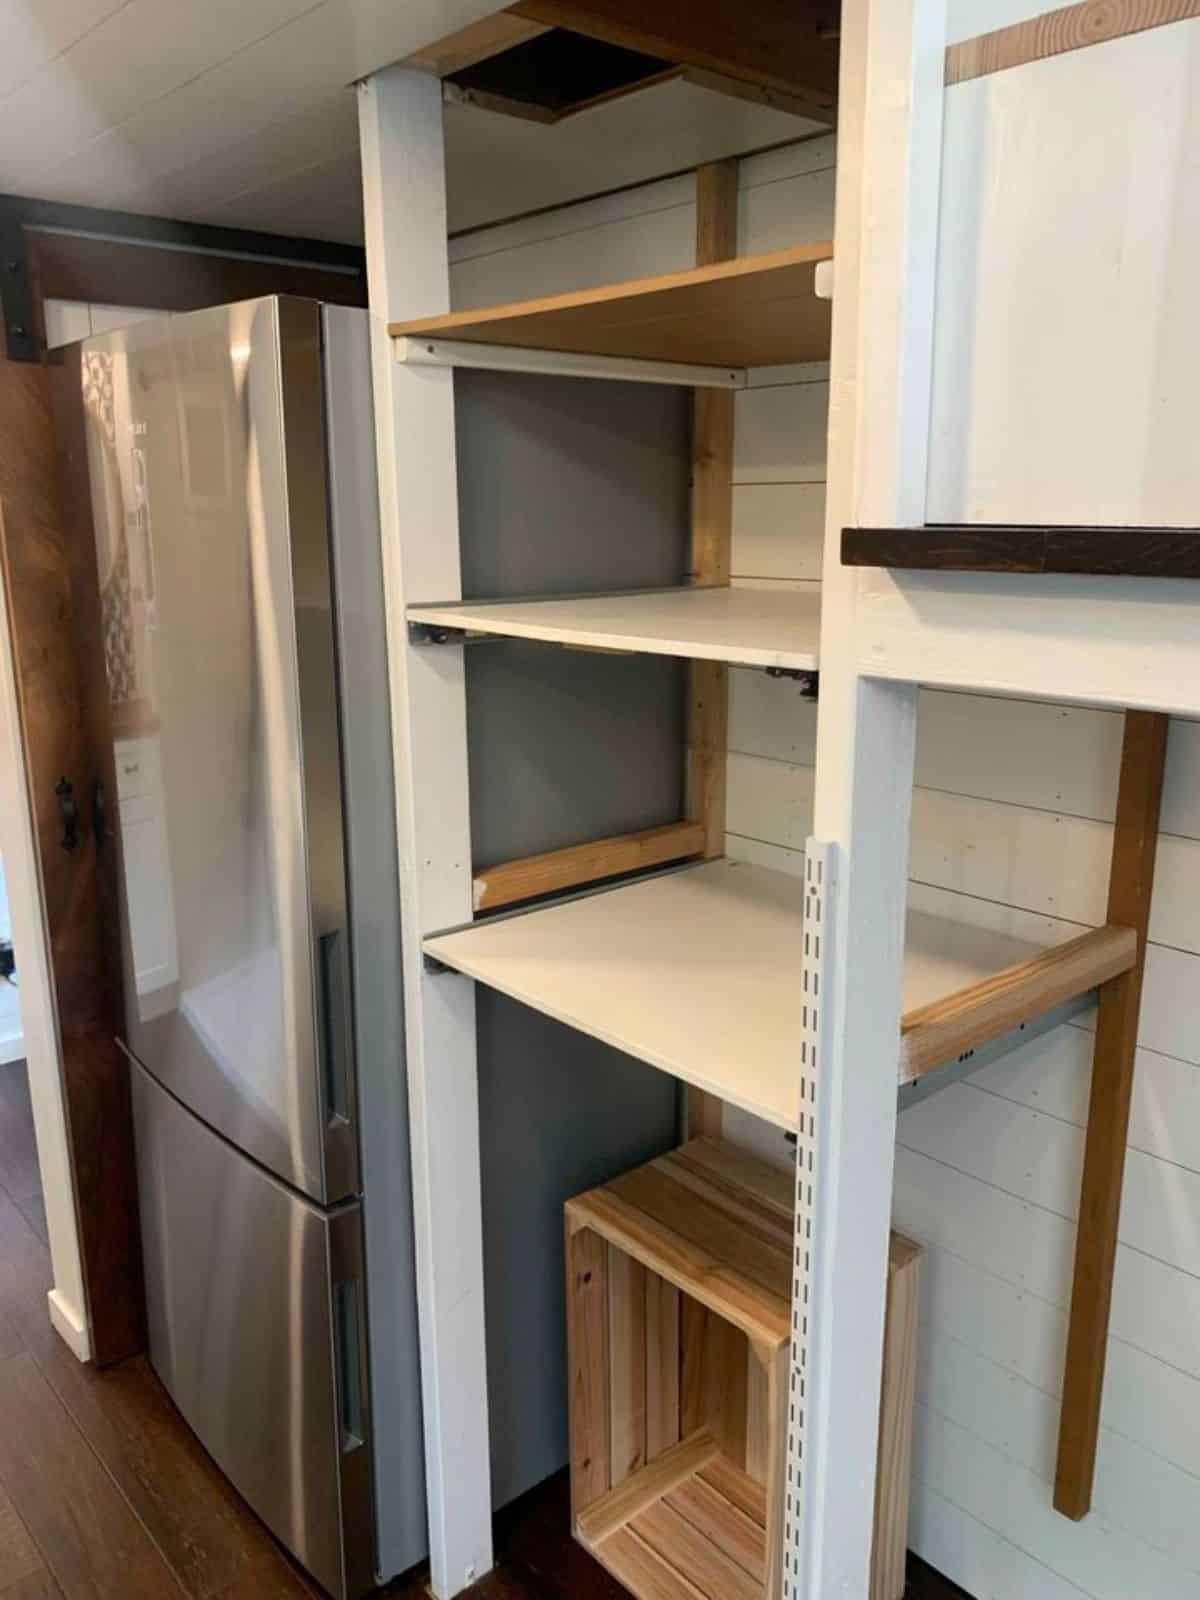 storage racks underneath the stairs and huge double door refrigerator in the kitchen